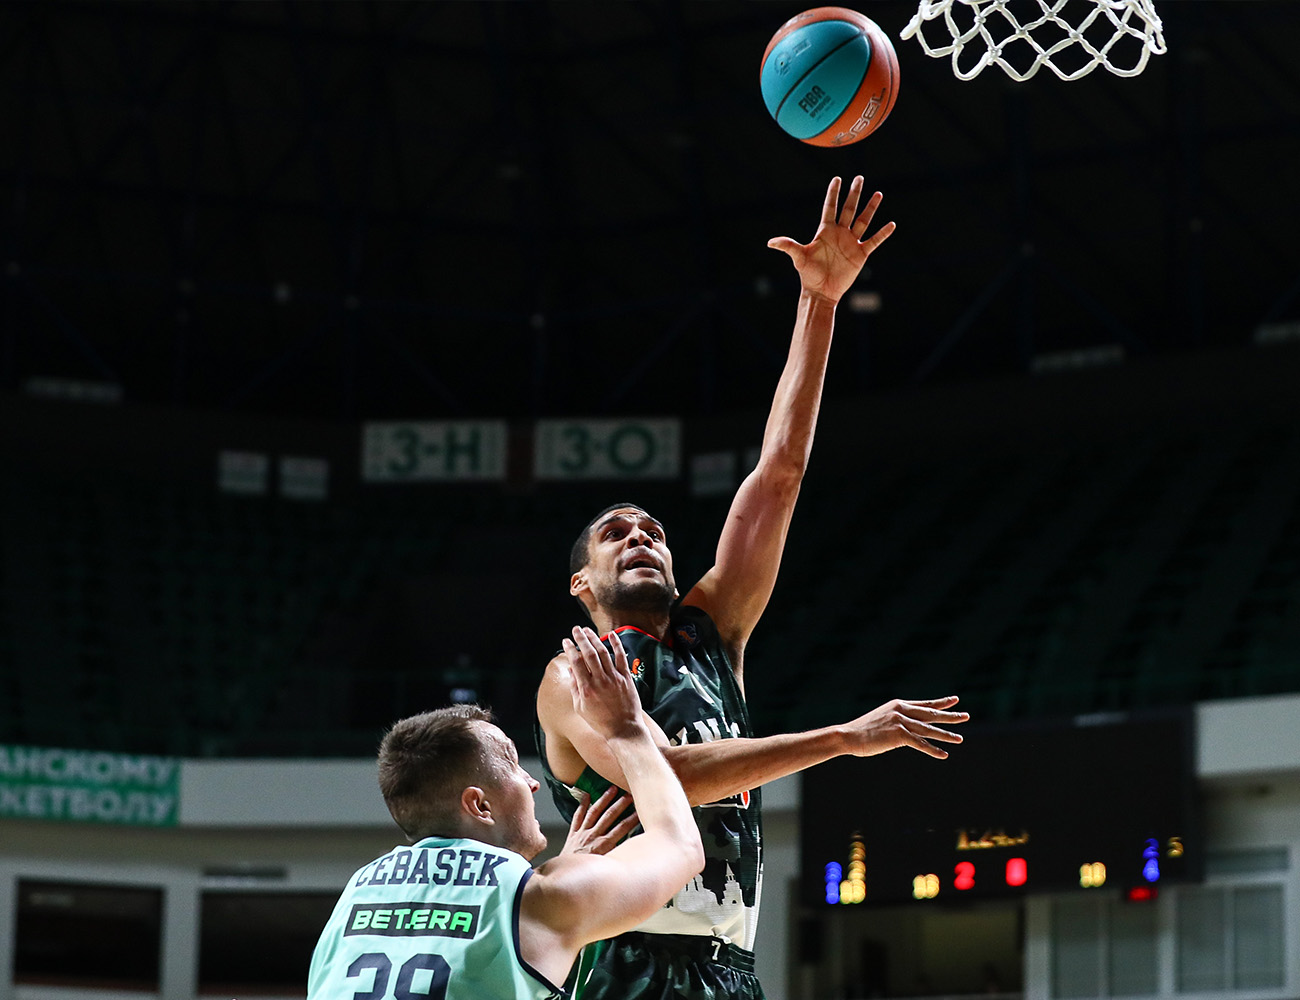 UNICS scored first 100 of the season and got the 4th win